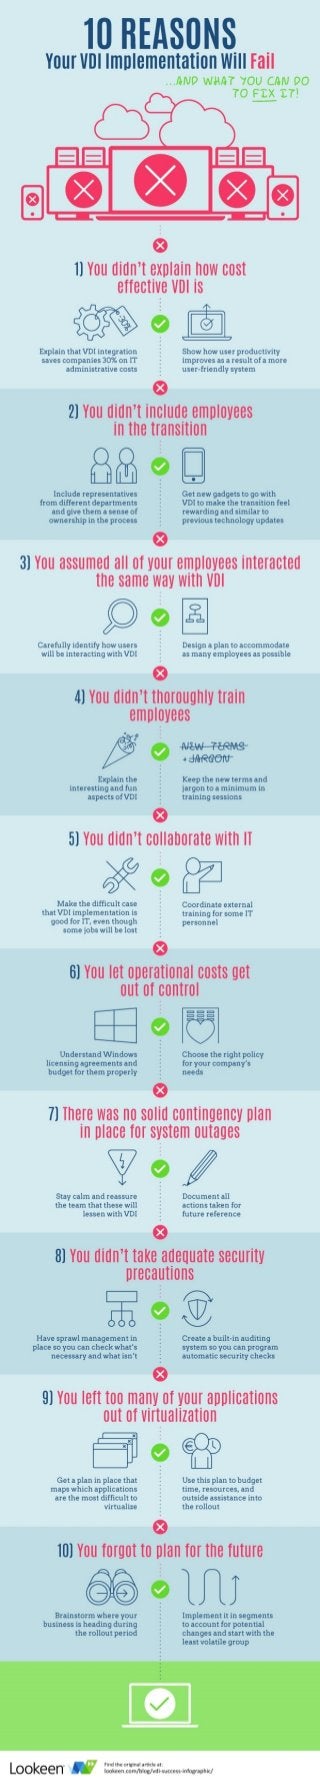 [Infographic] 10 Reasons Your VDI Implementation Will Fail.. 